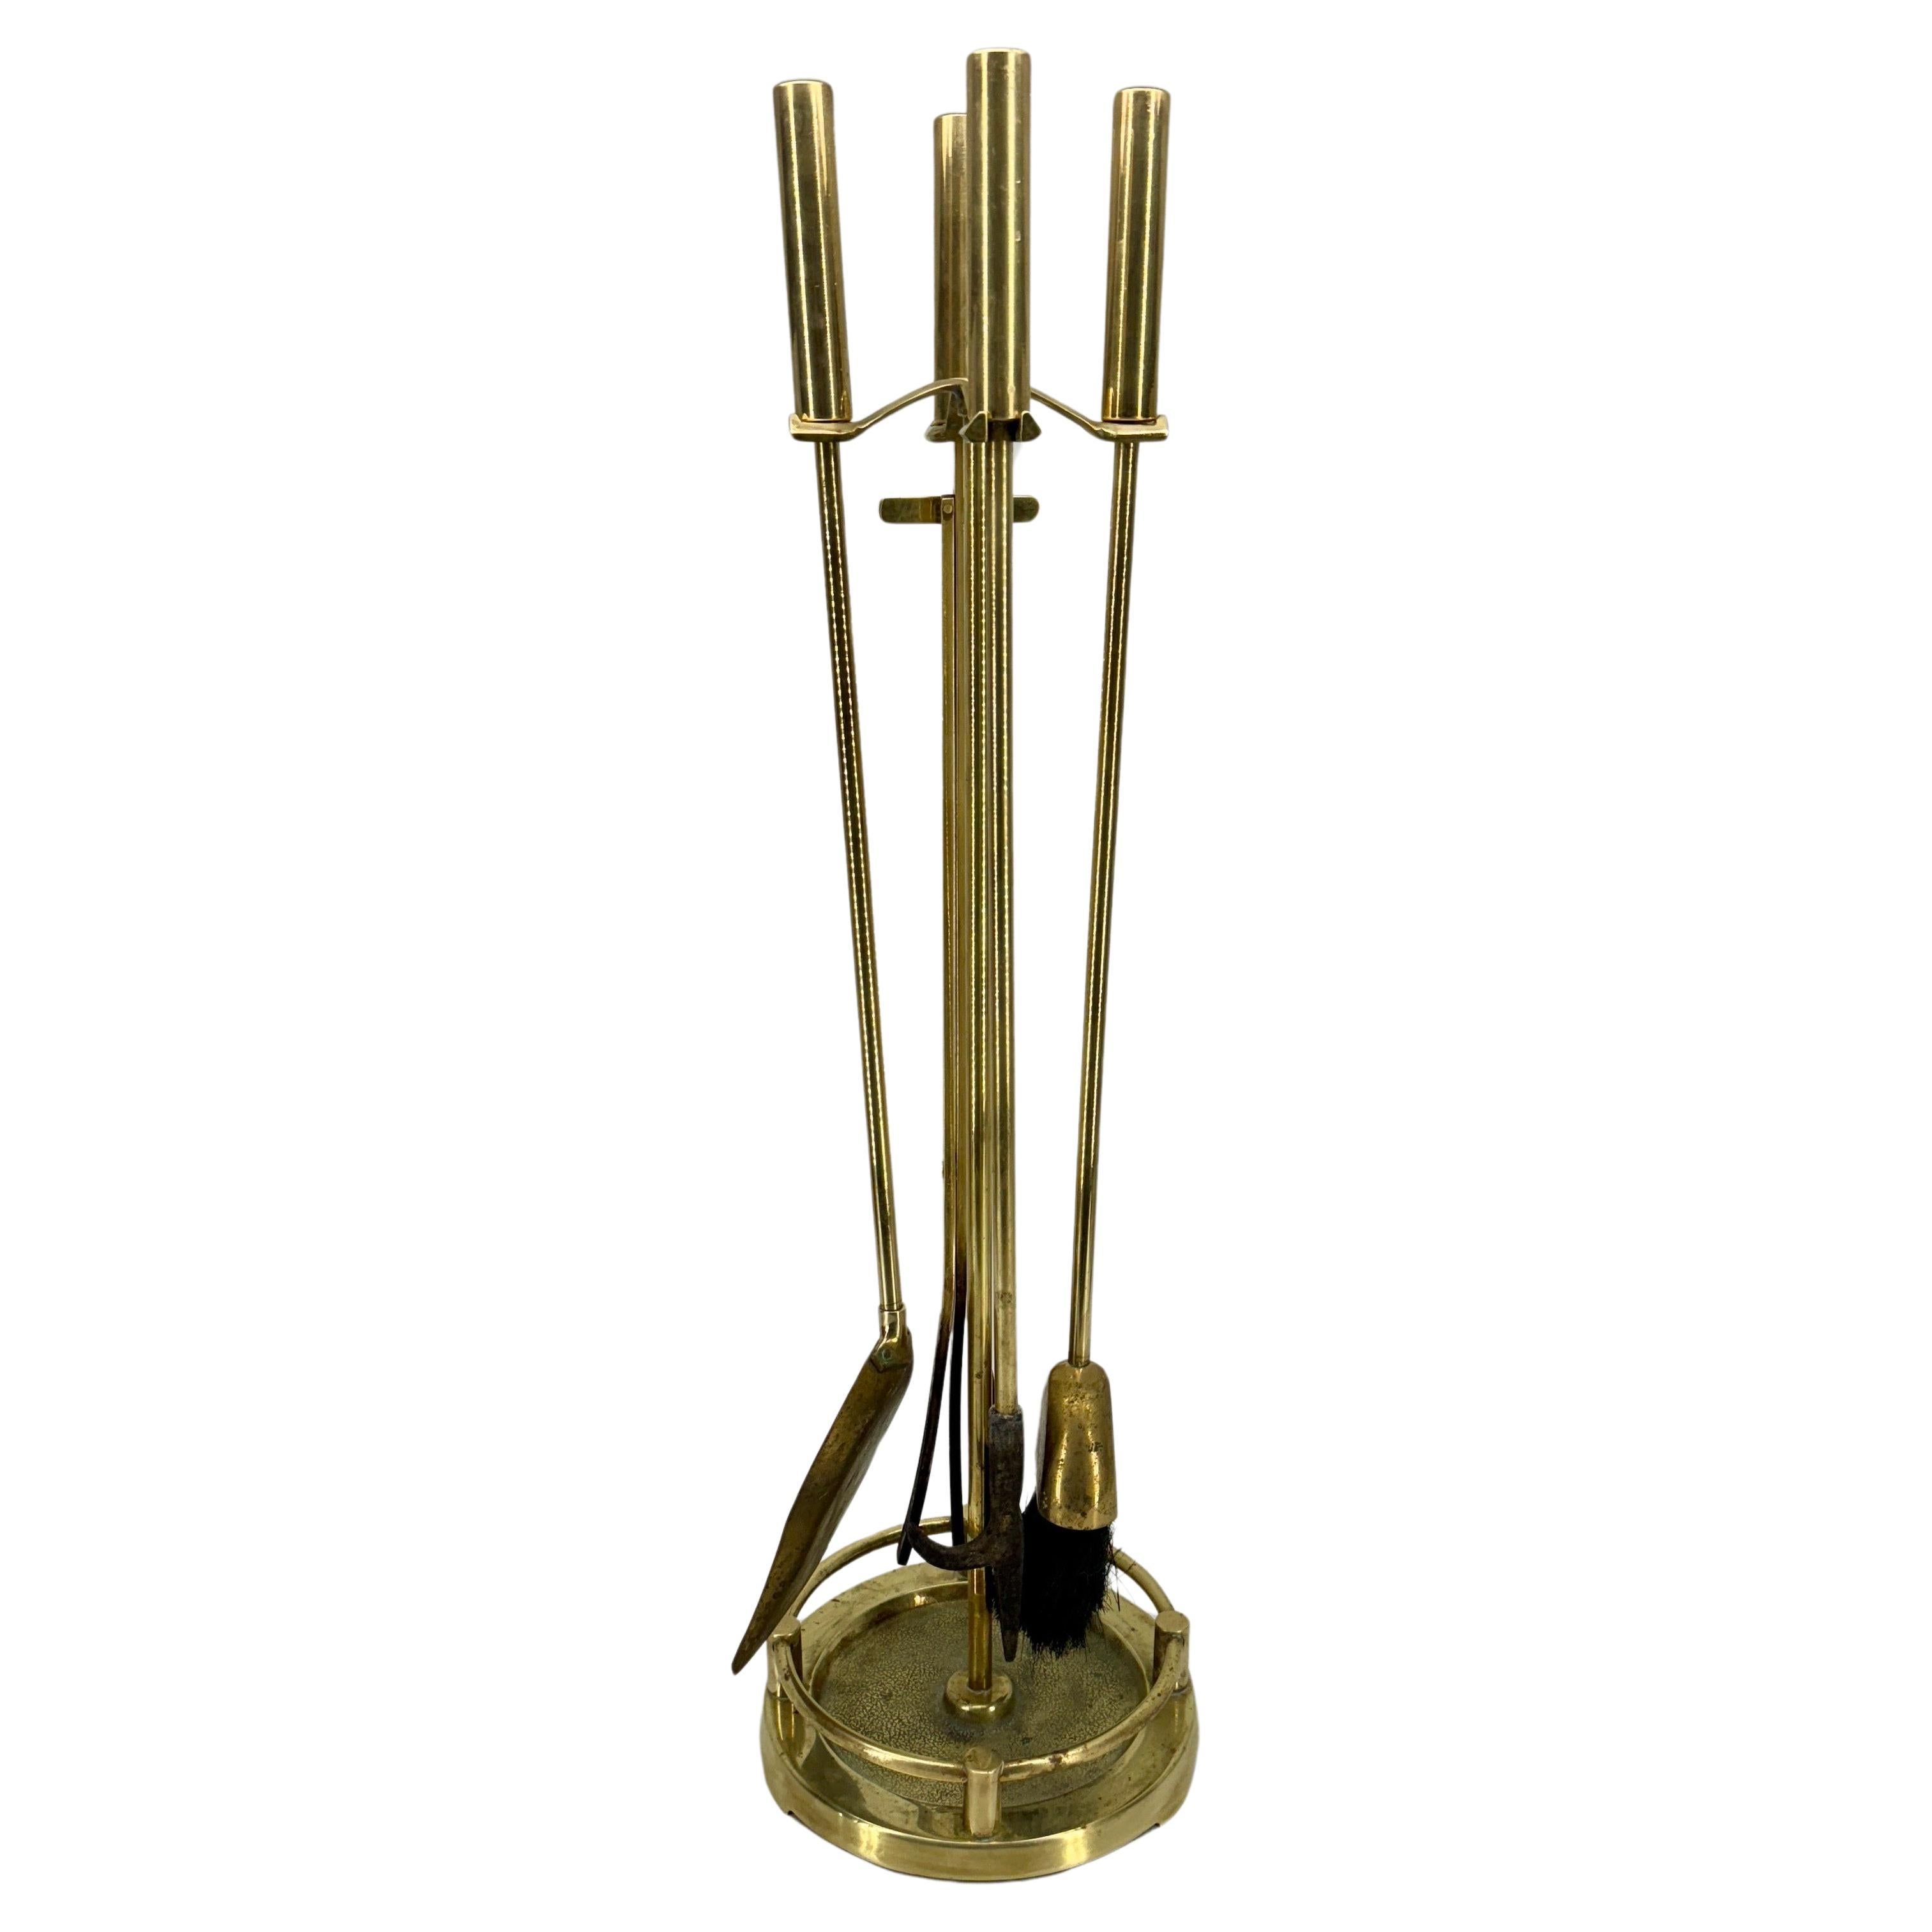 Four Piece Set of Solid Brass Fireplace Tools. Great classic vintage set with wonderful newly polished patina. This Mid-Century set is sleek and would be functional in a modern as well as traditional setting.
